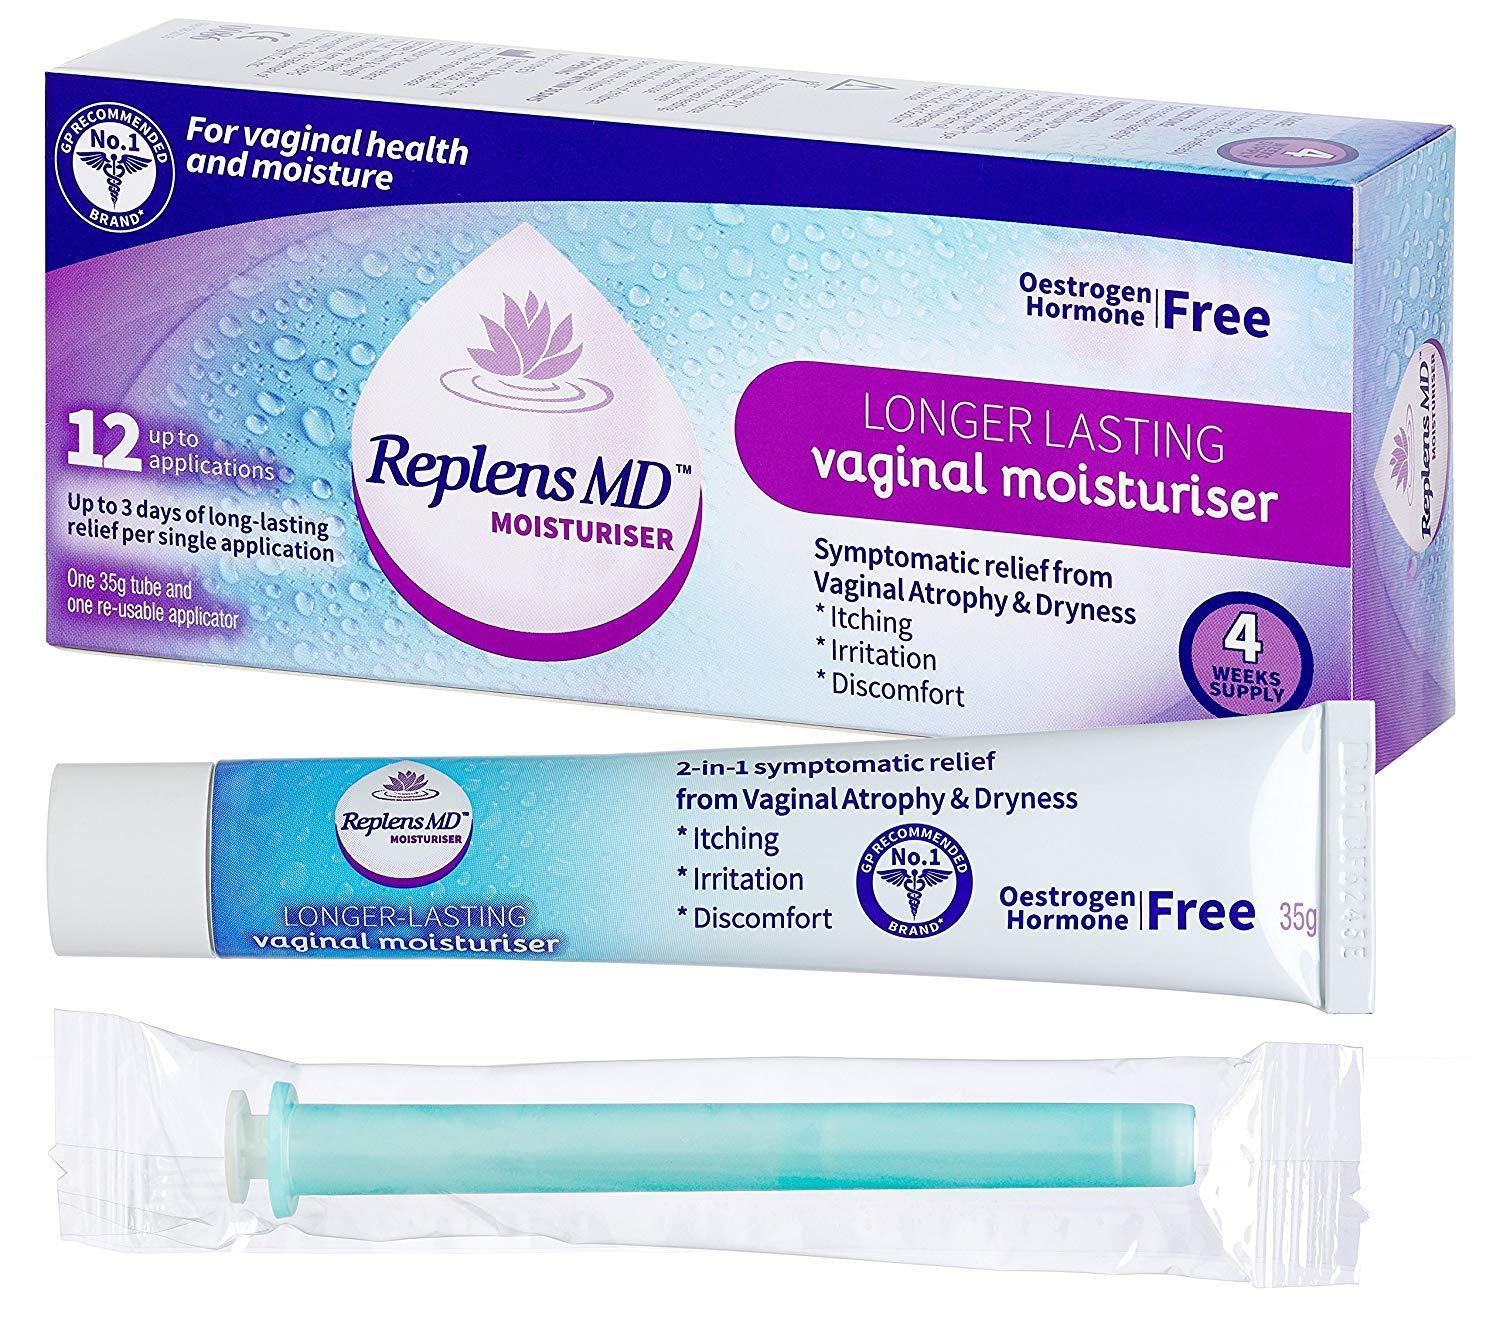 Replens Reviews: What's the Deal with Vaginal Moisturizers?